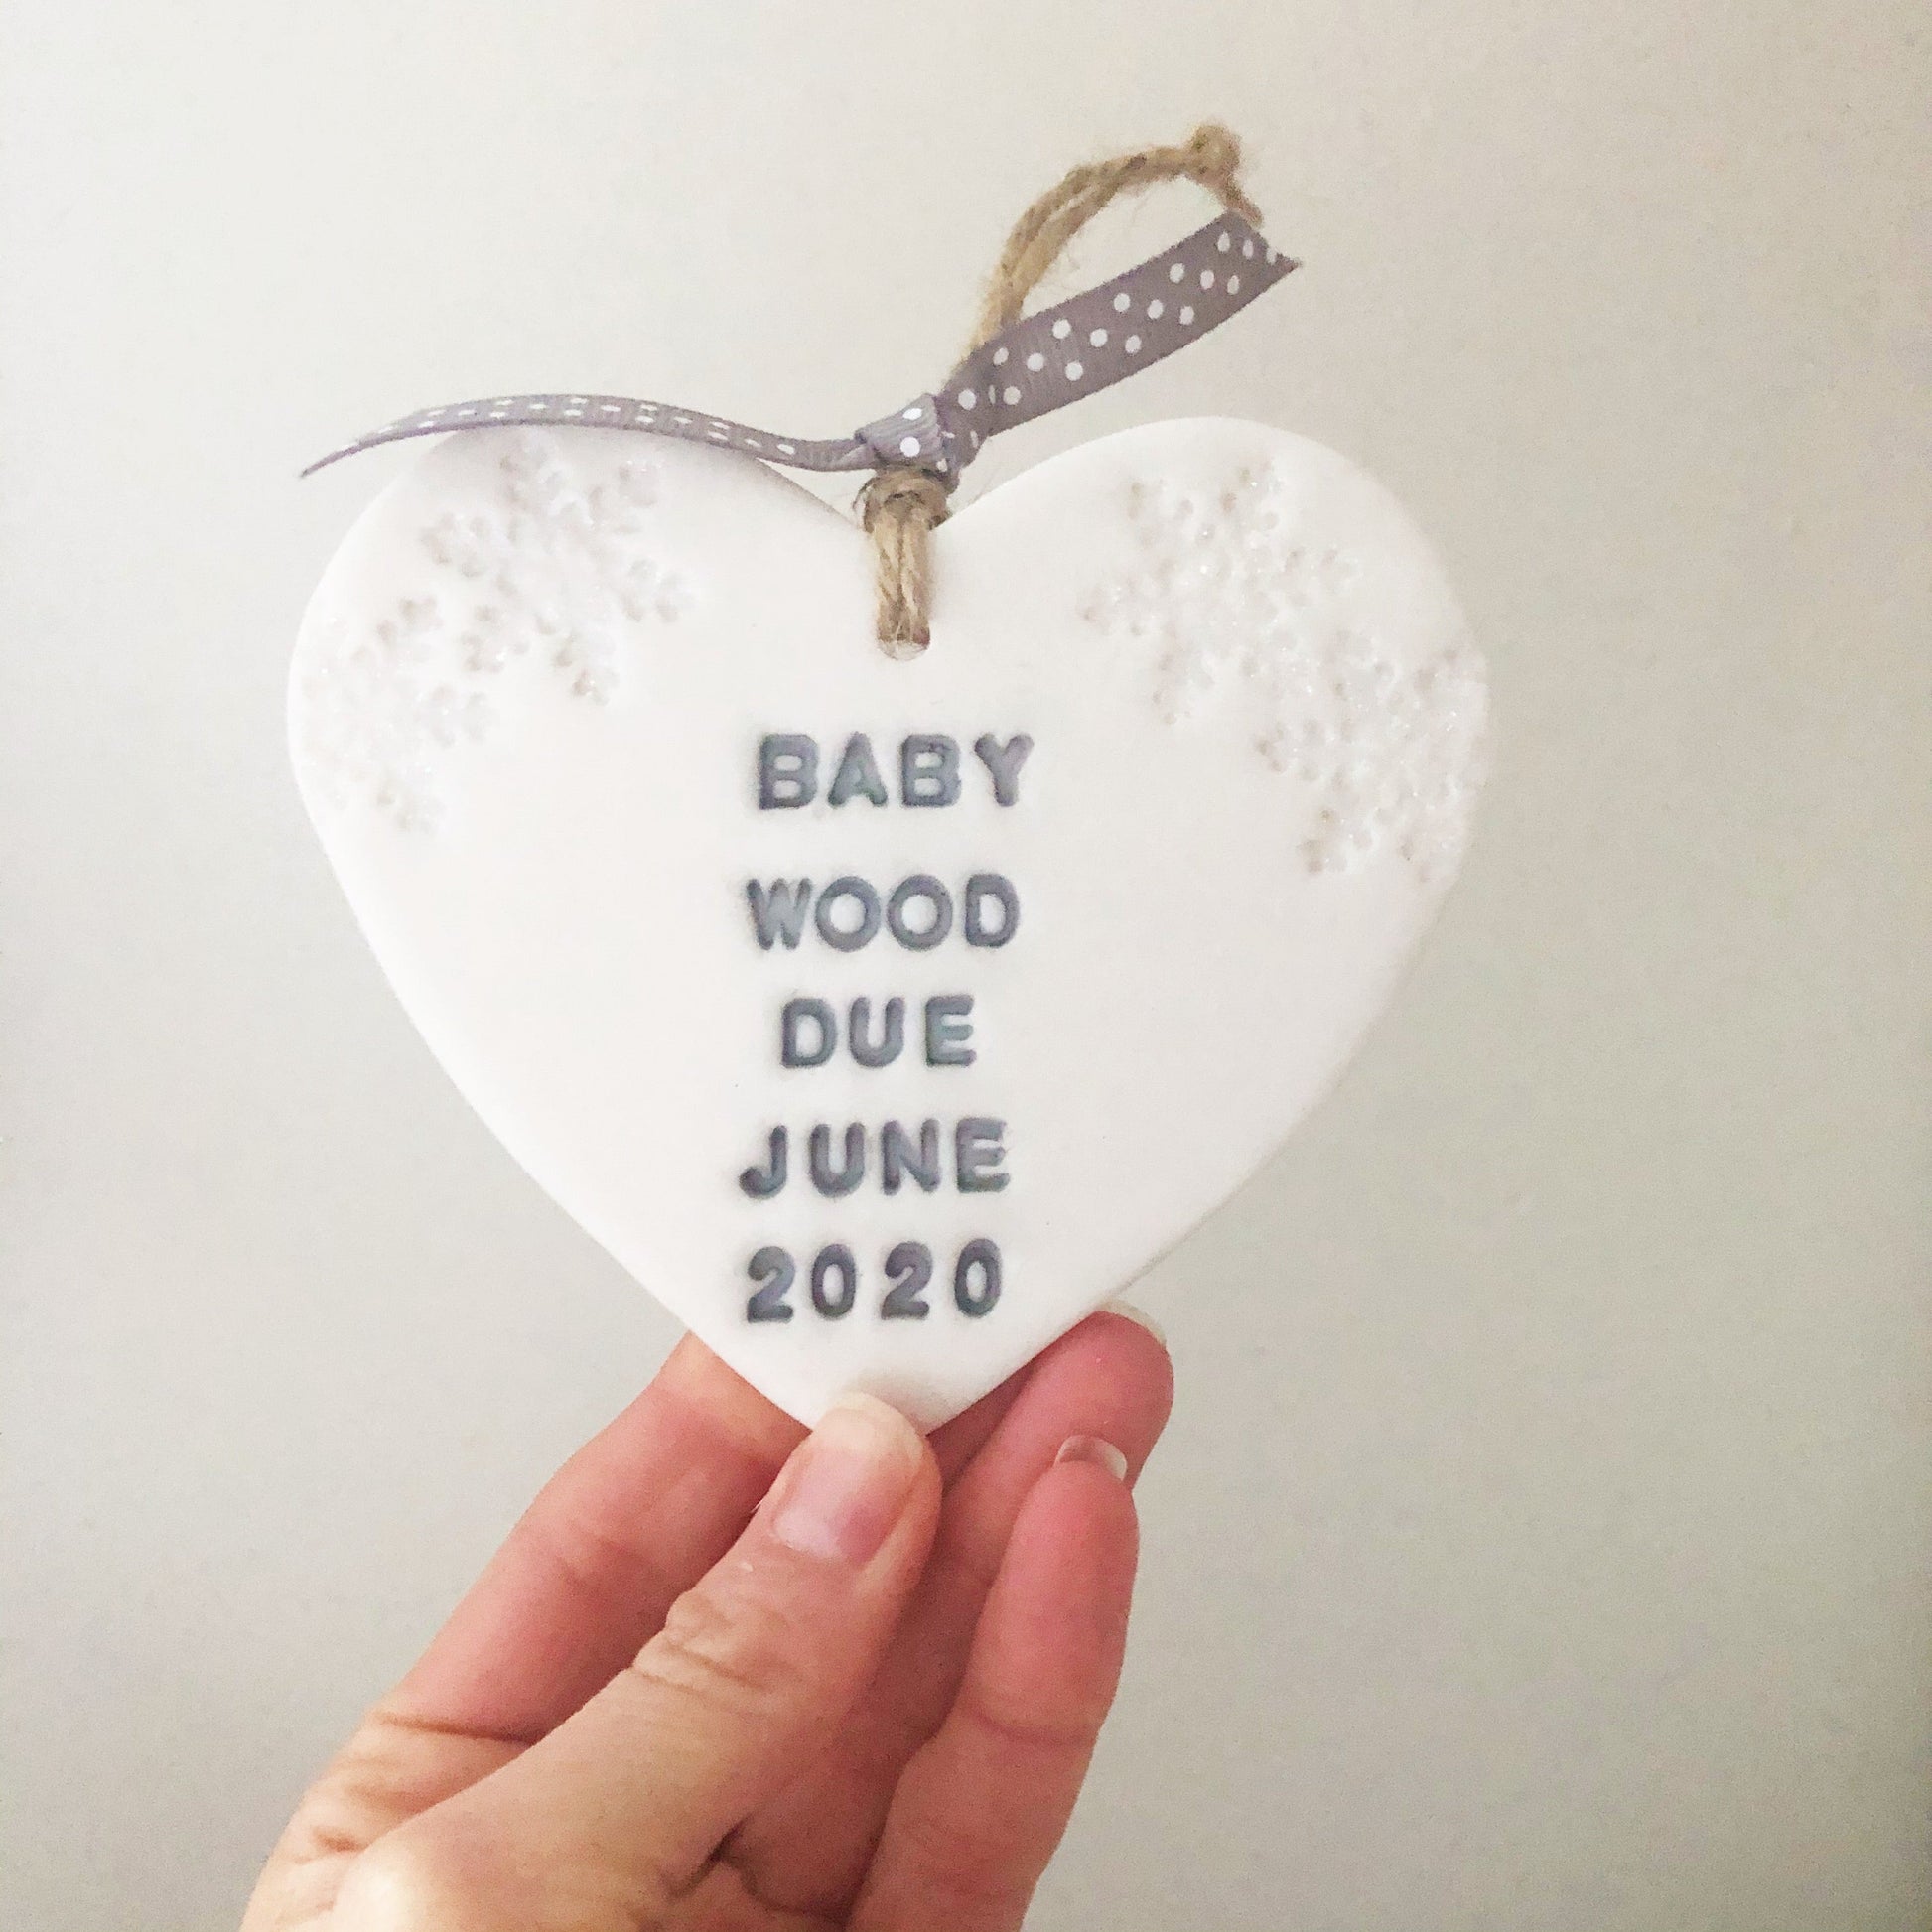 Personalised baby's first Christmas heart ornament, pearlised white clay with BABY WOOD DUE JUNE 2020 painted grey, decorated with 2 iridescent glitter snowflakes on either side of the top of the heart